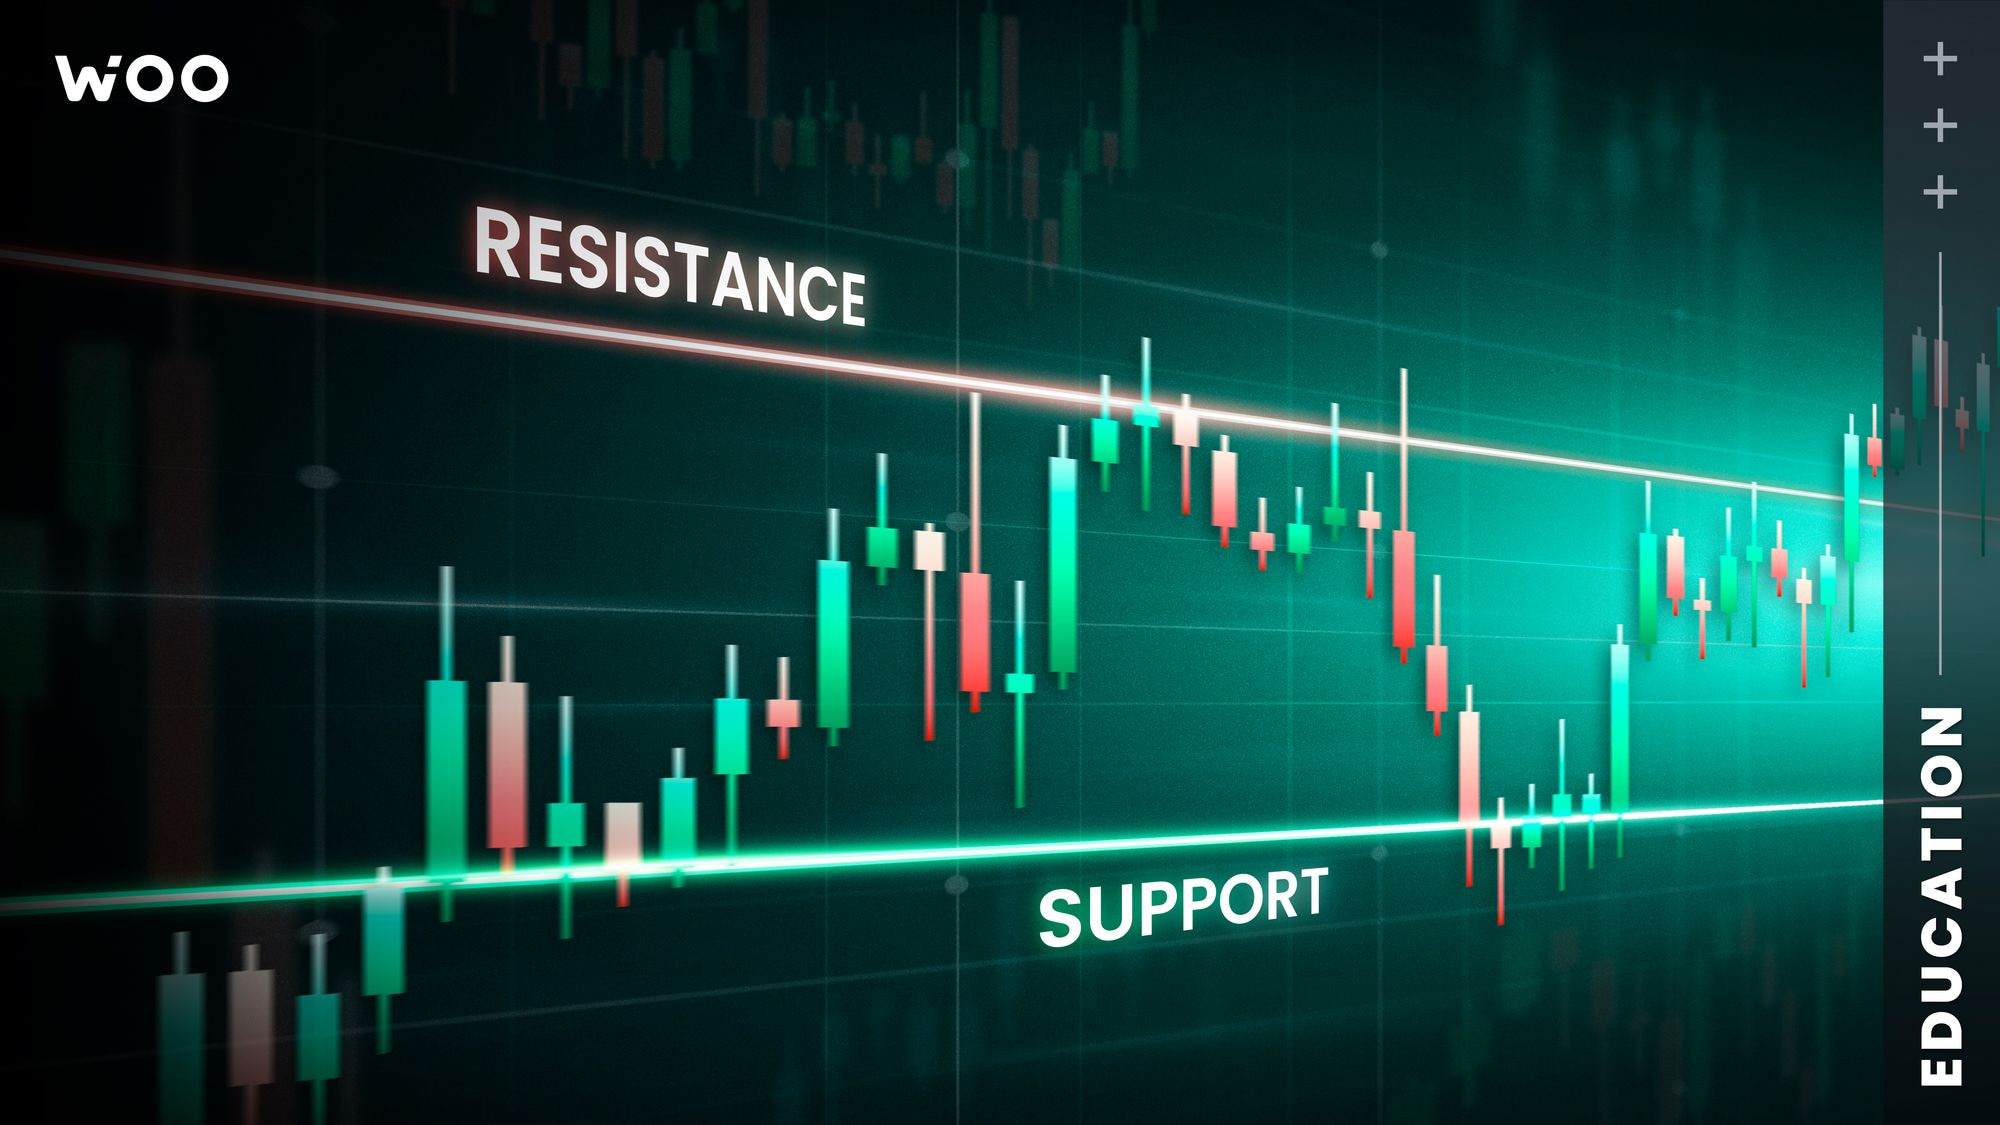 Support & Resistance: A self-fulfilling prophecy?